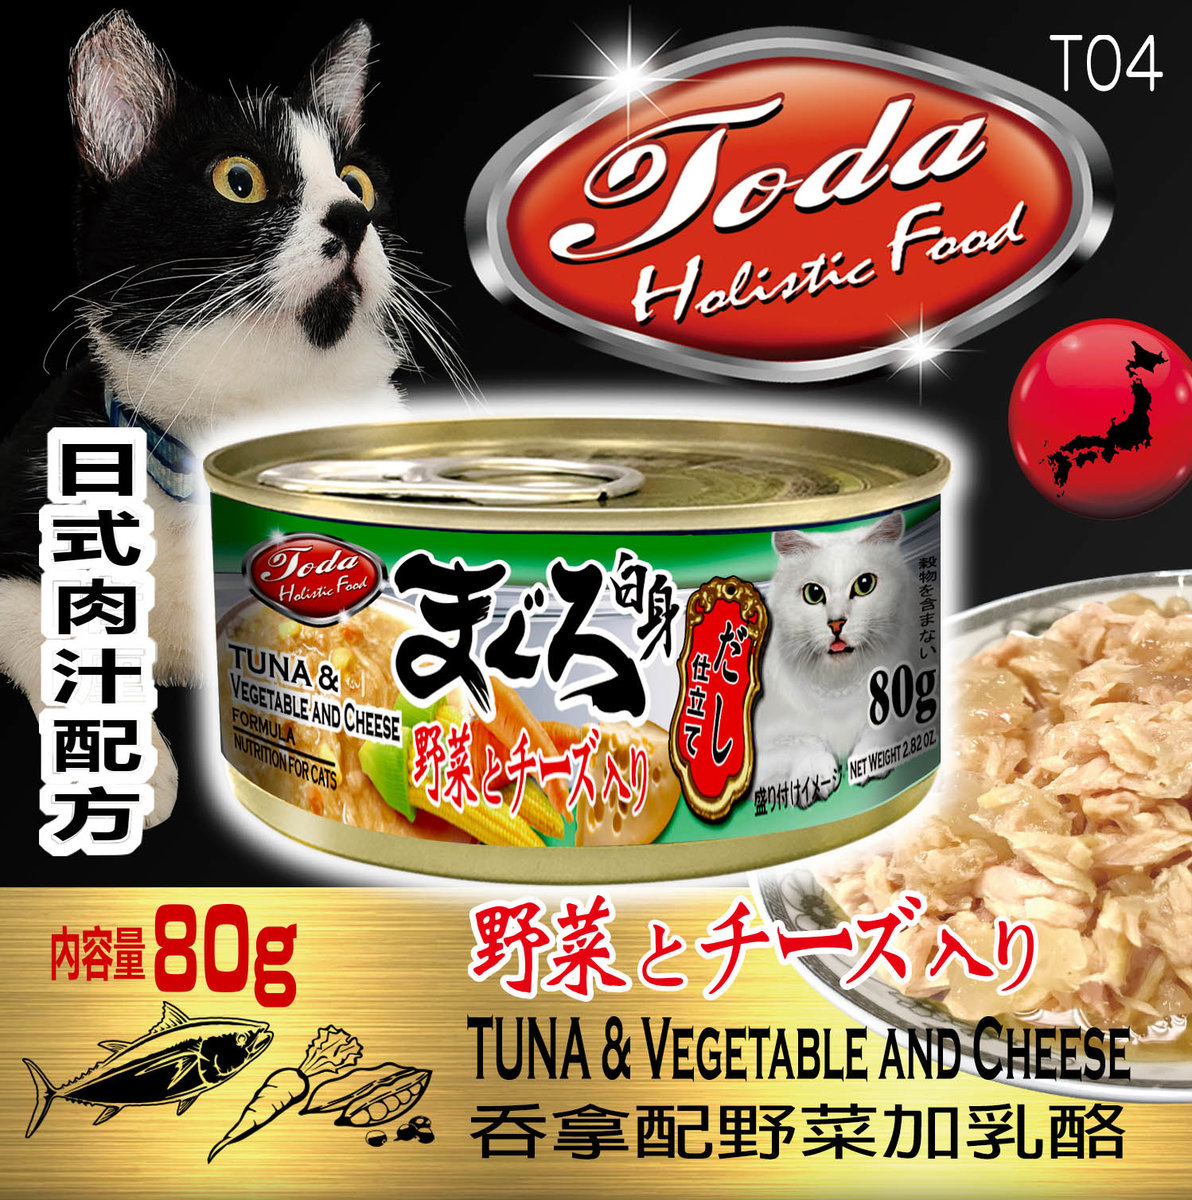 Toda Japanese-style Gravy Formula - Tuna & Vegetable and Cheese 80g / Can